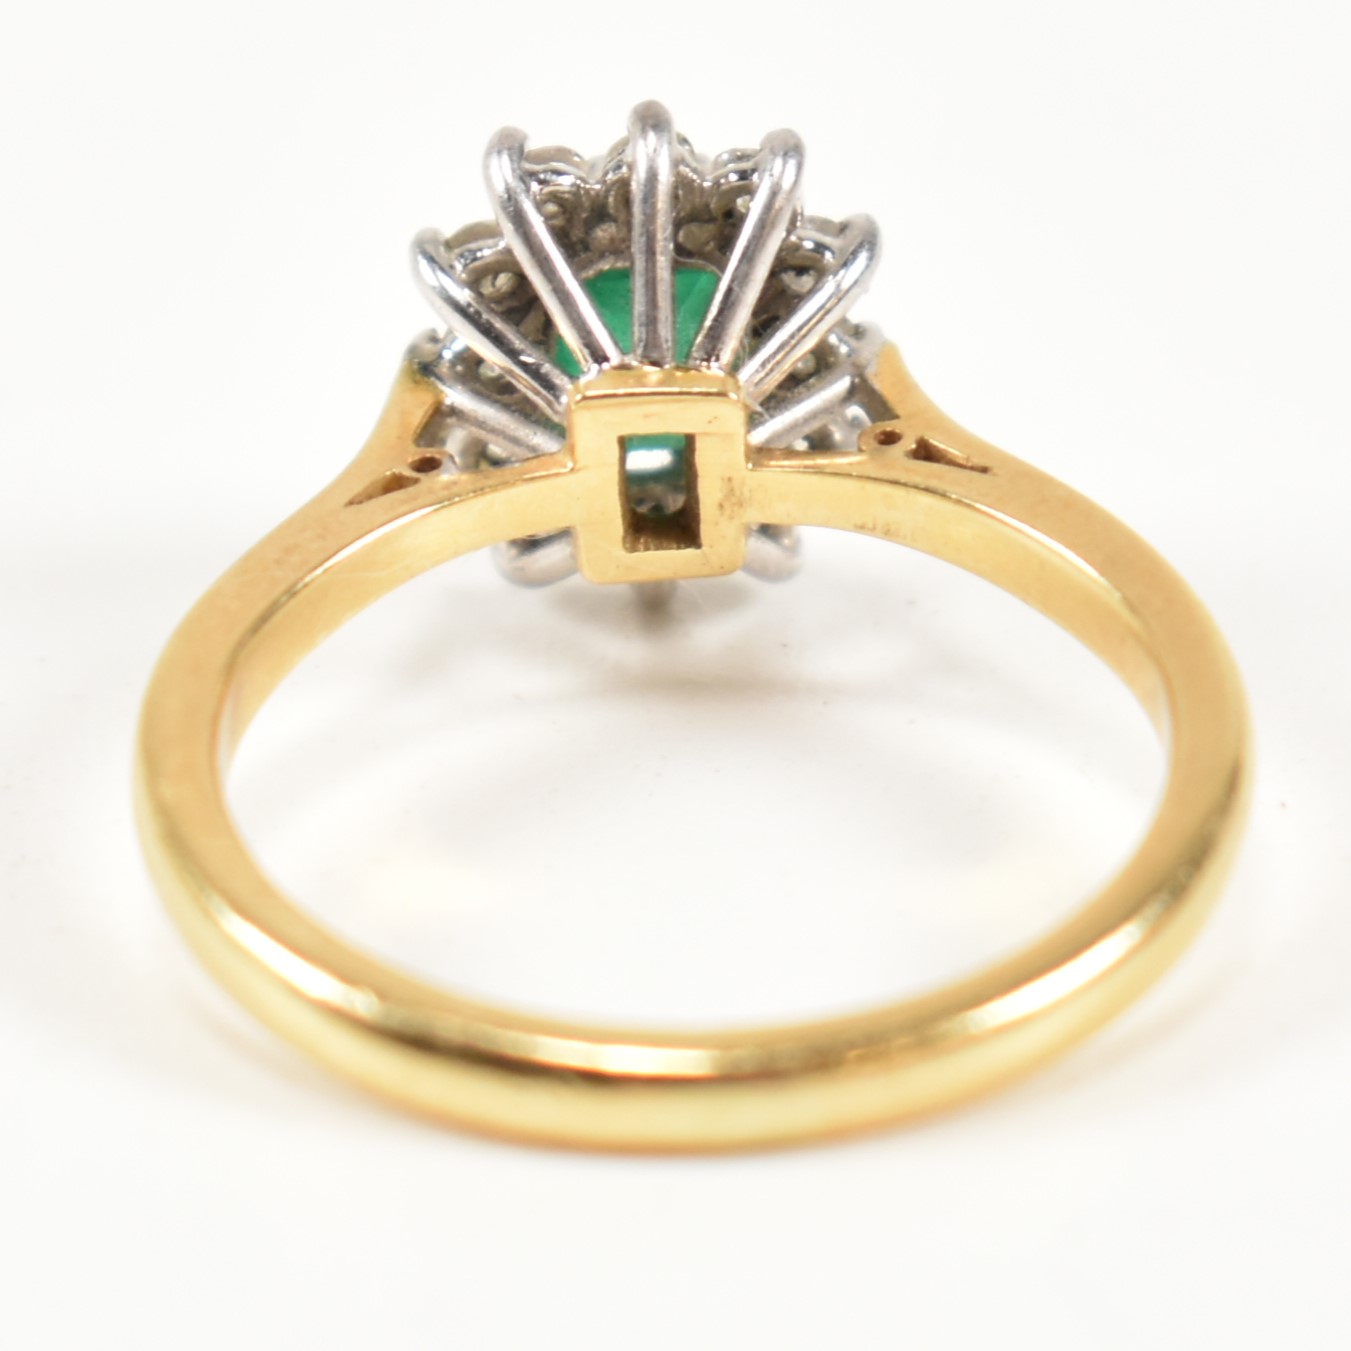 HALLMARKED 18CT GOLD EMERALD & DIAMOND CLUSTER RING - Image 3 of 9